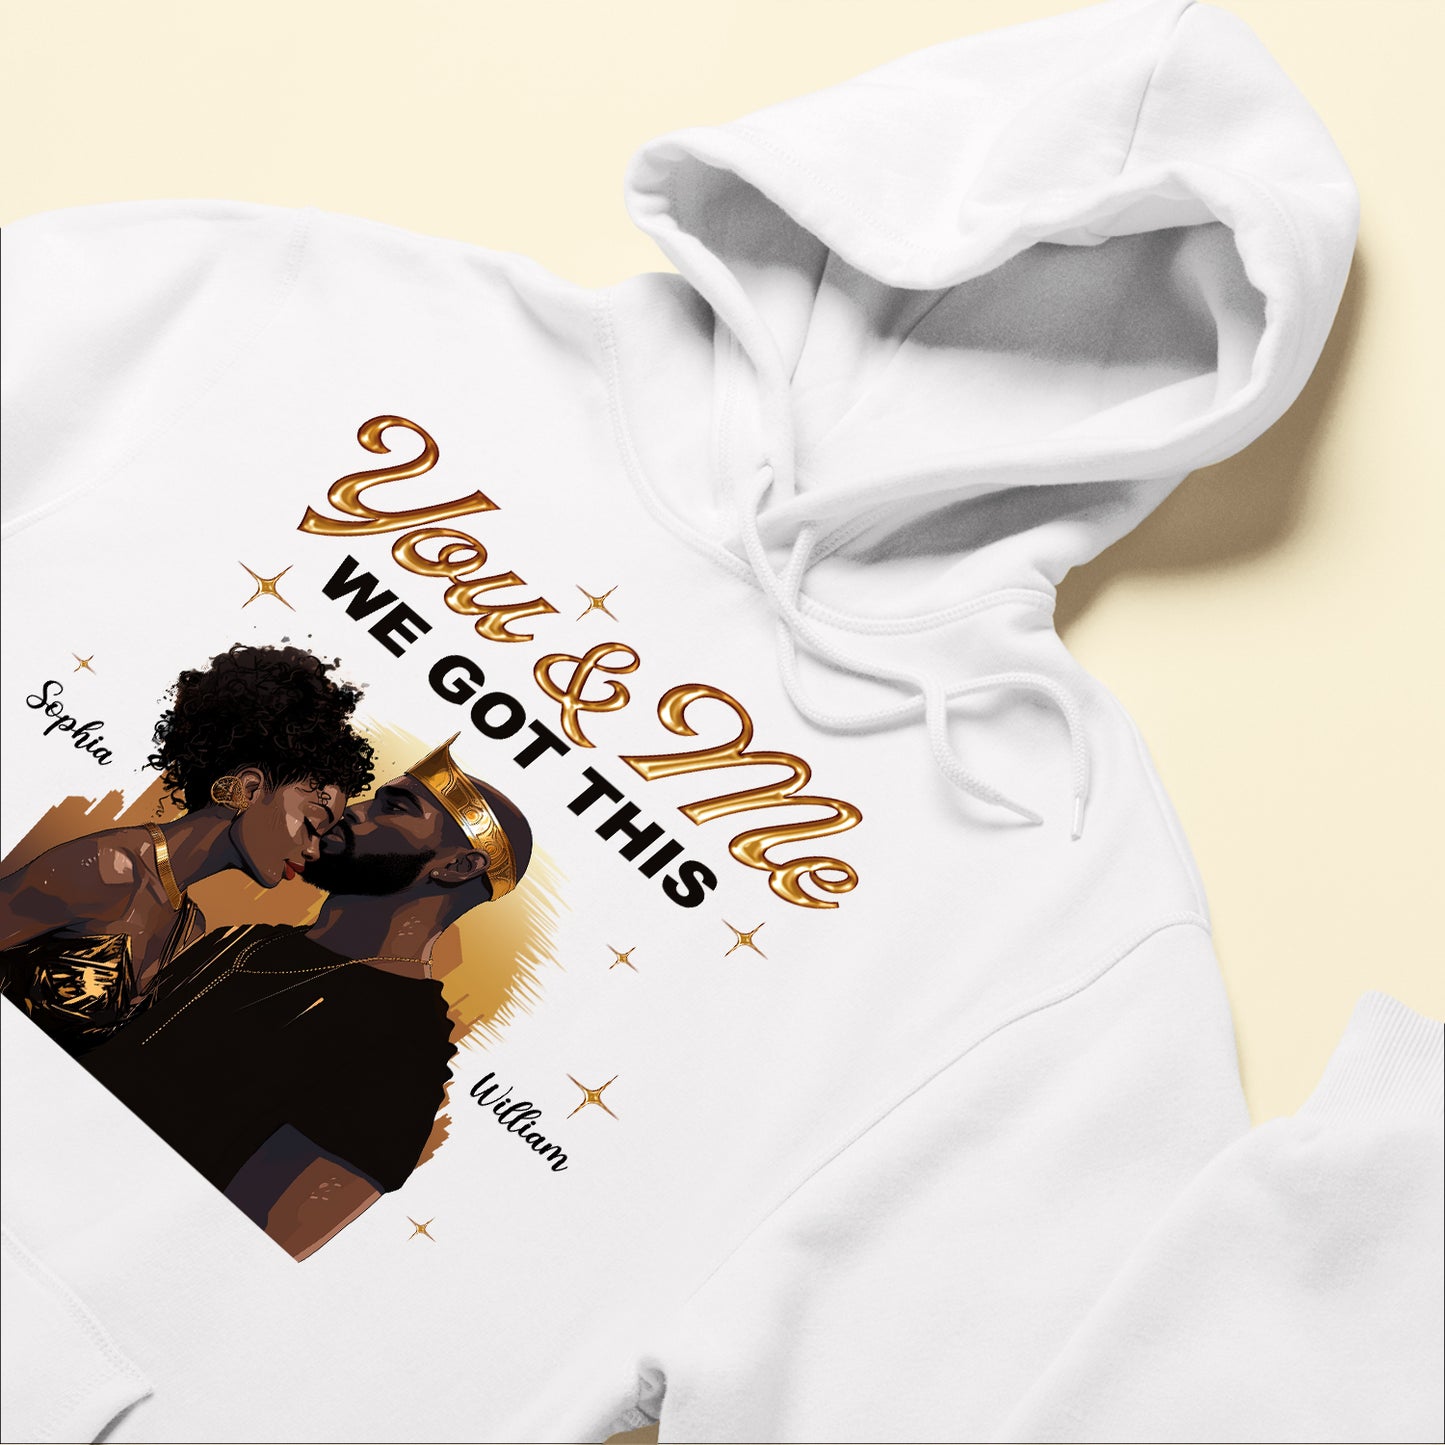 You And Me We Got This Black African Couple - Personalized Photo Shirt